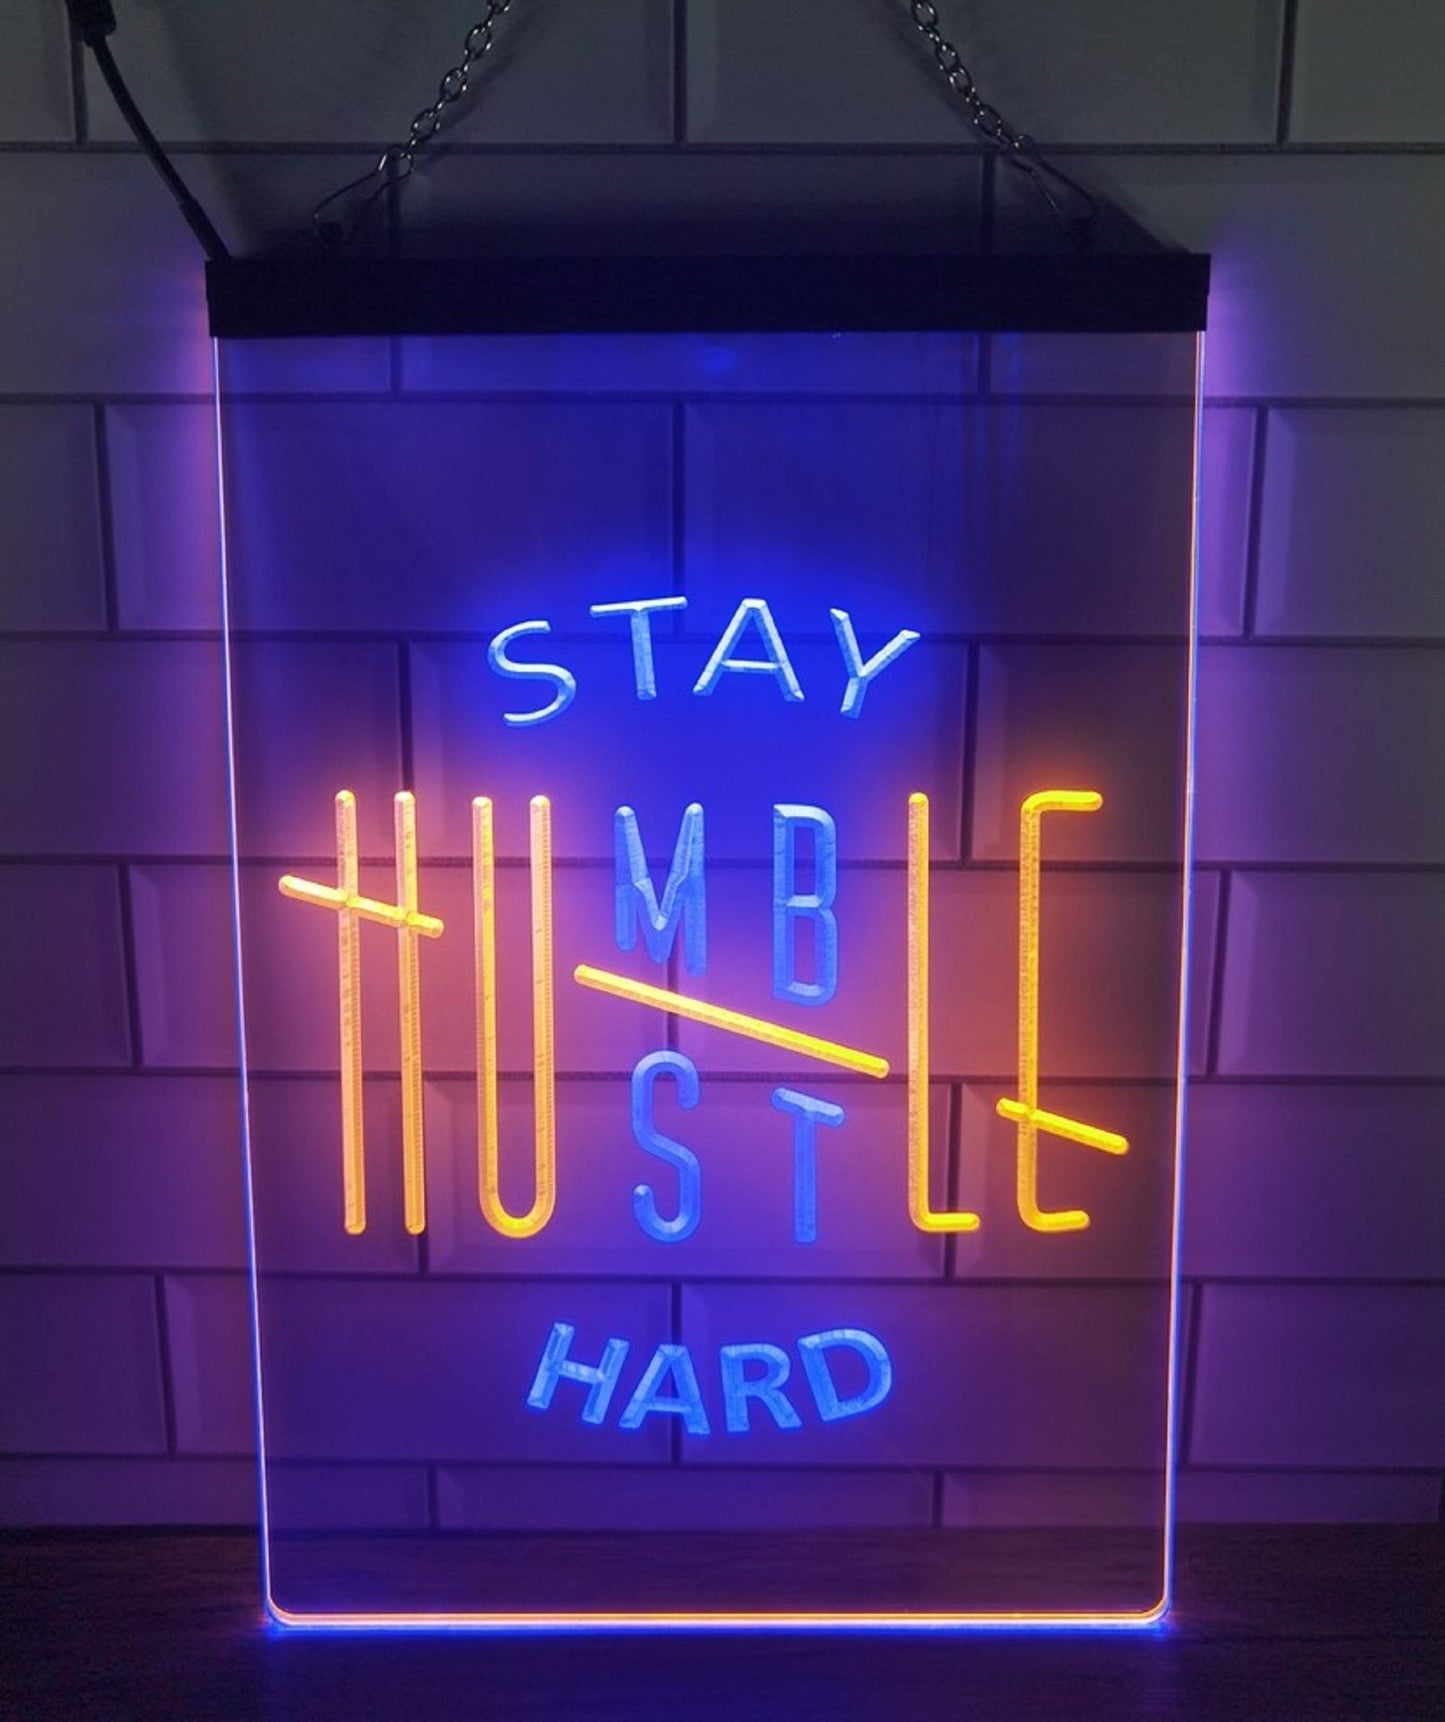 Neon Sign Dual Color Stay Humble Hustle Hard Wall Hanging Table Top Decor